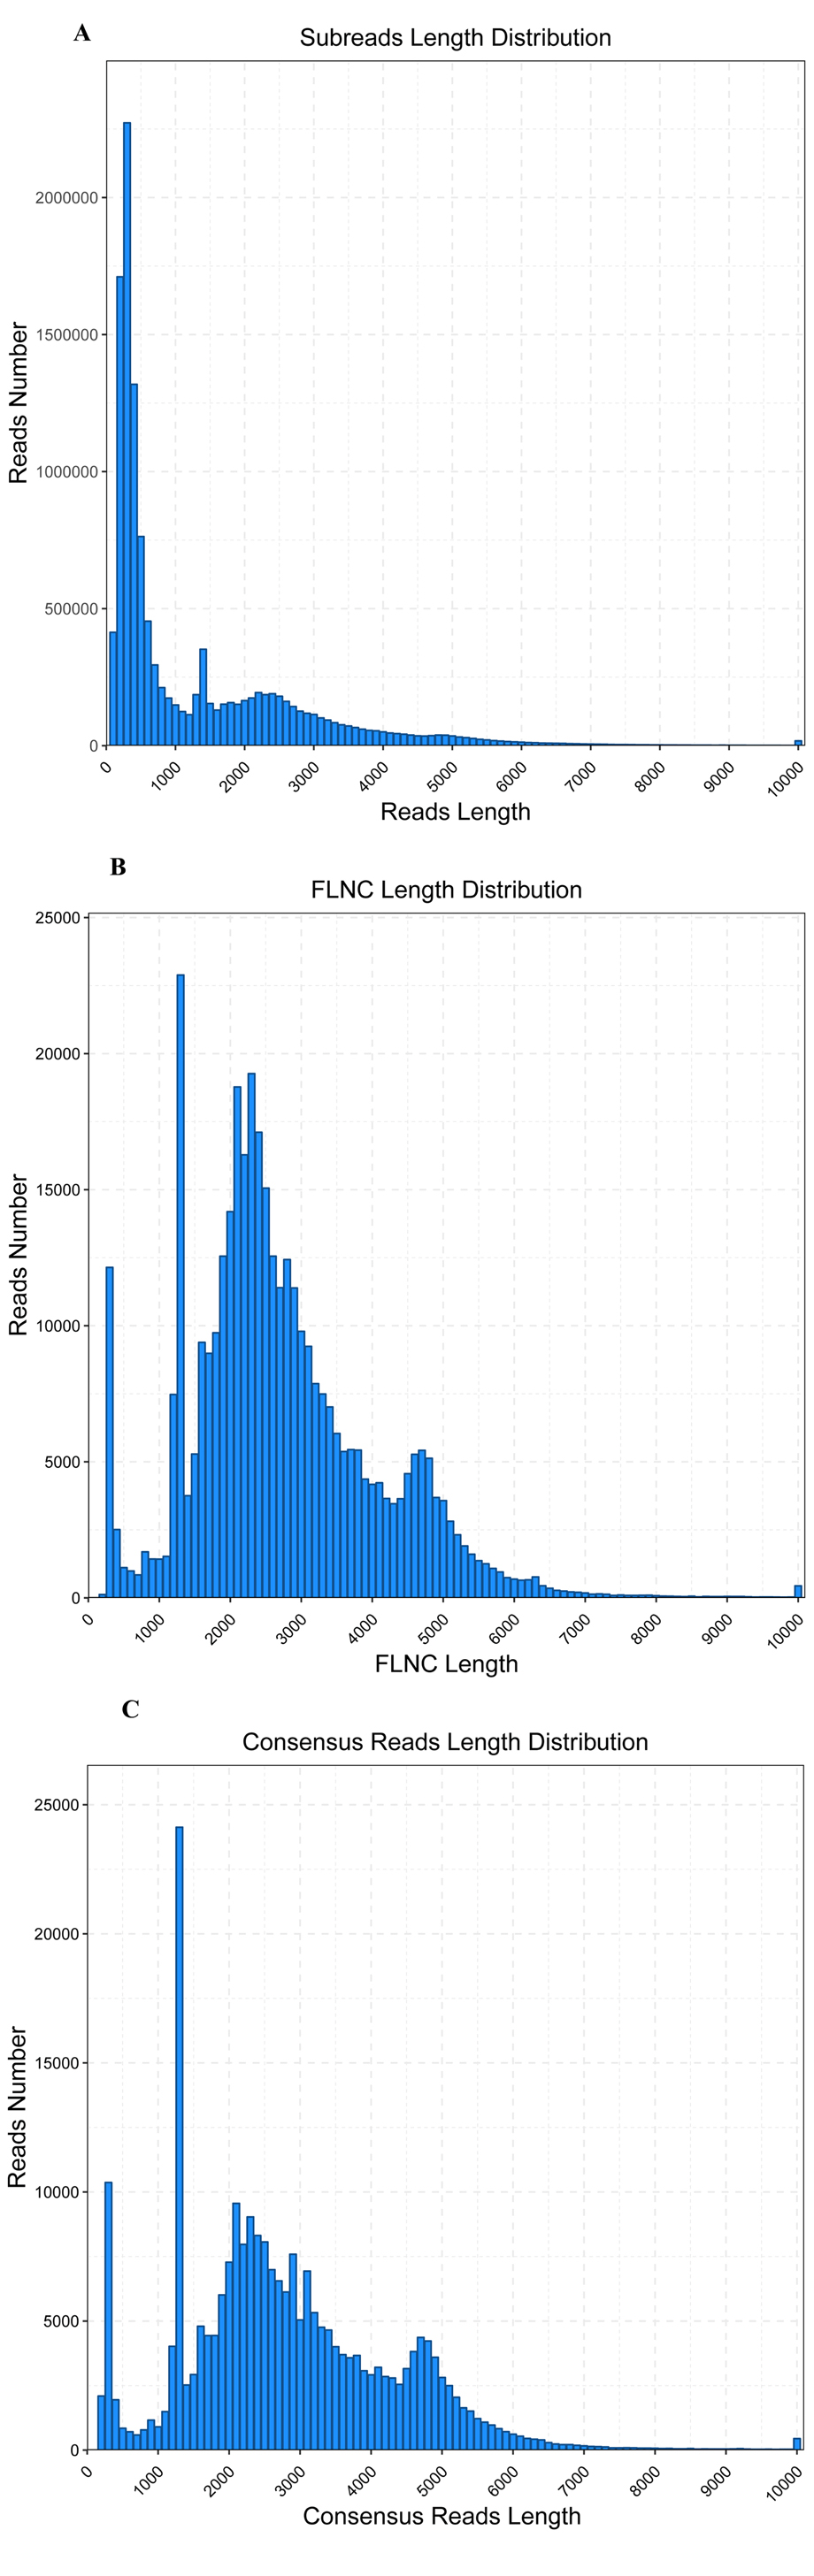 Histogram of total delay time in days of 781 papers published in